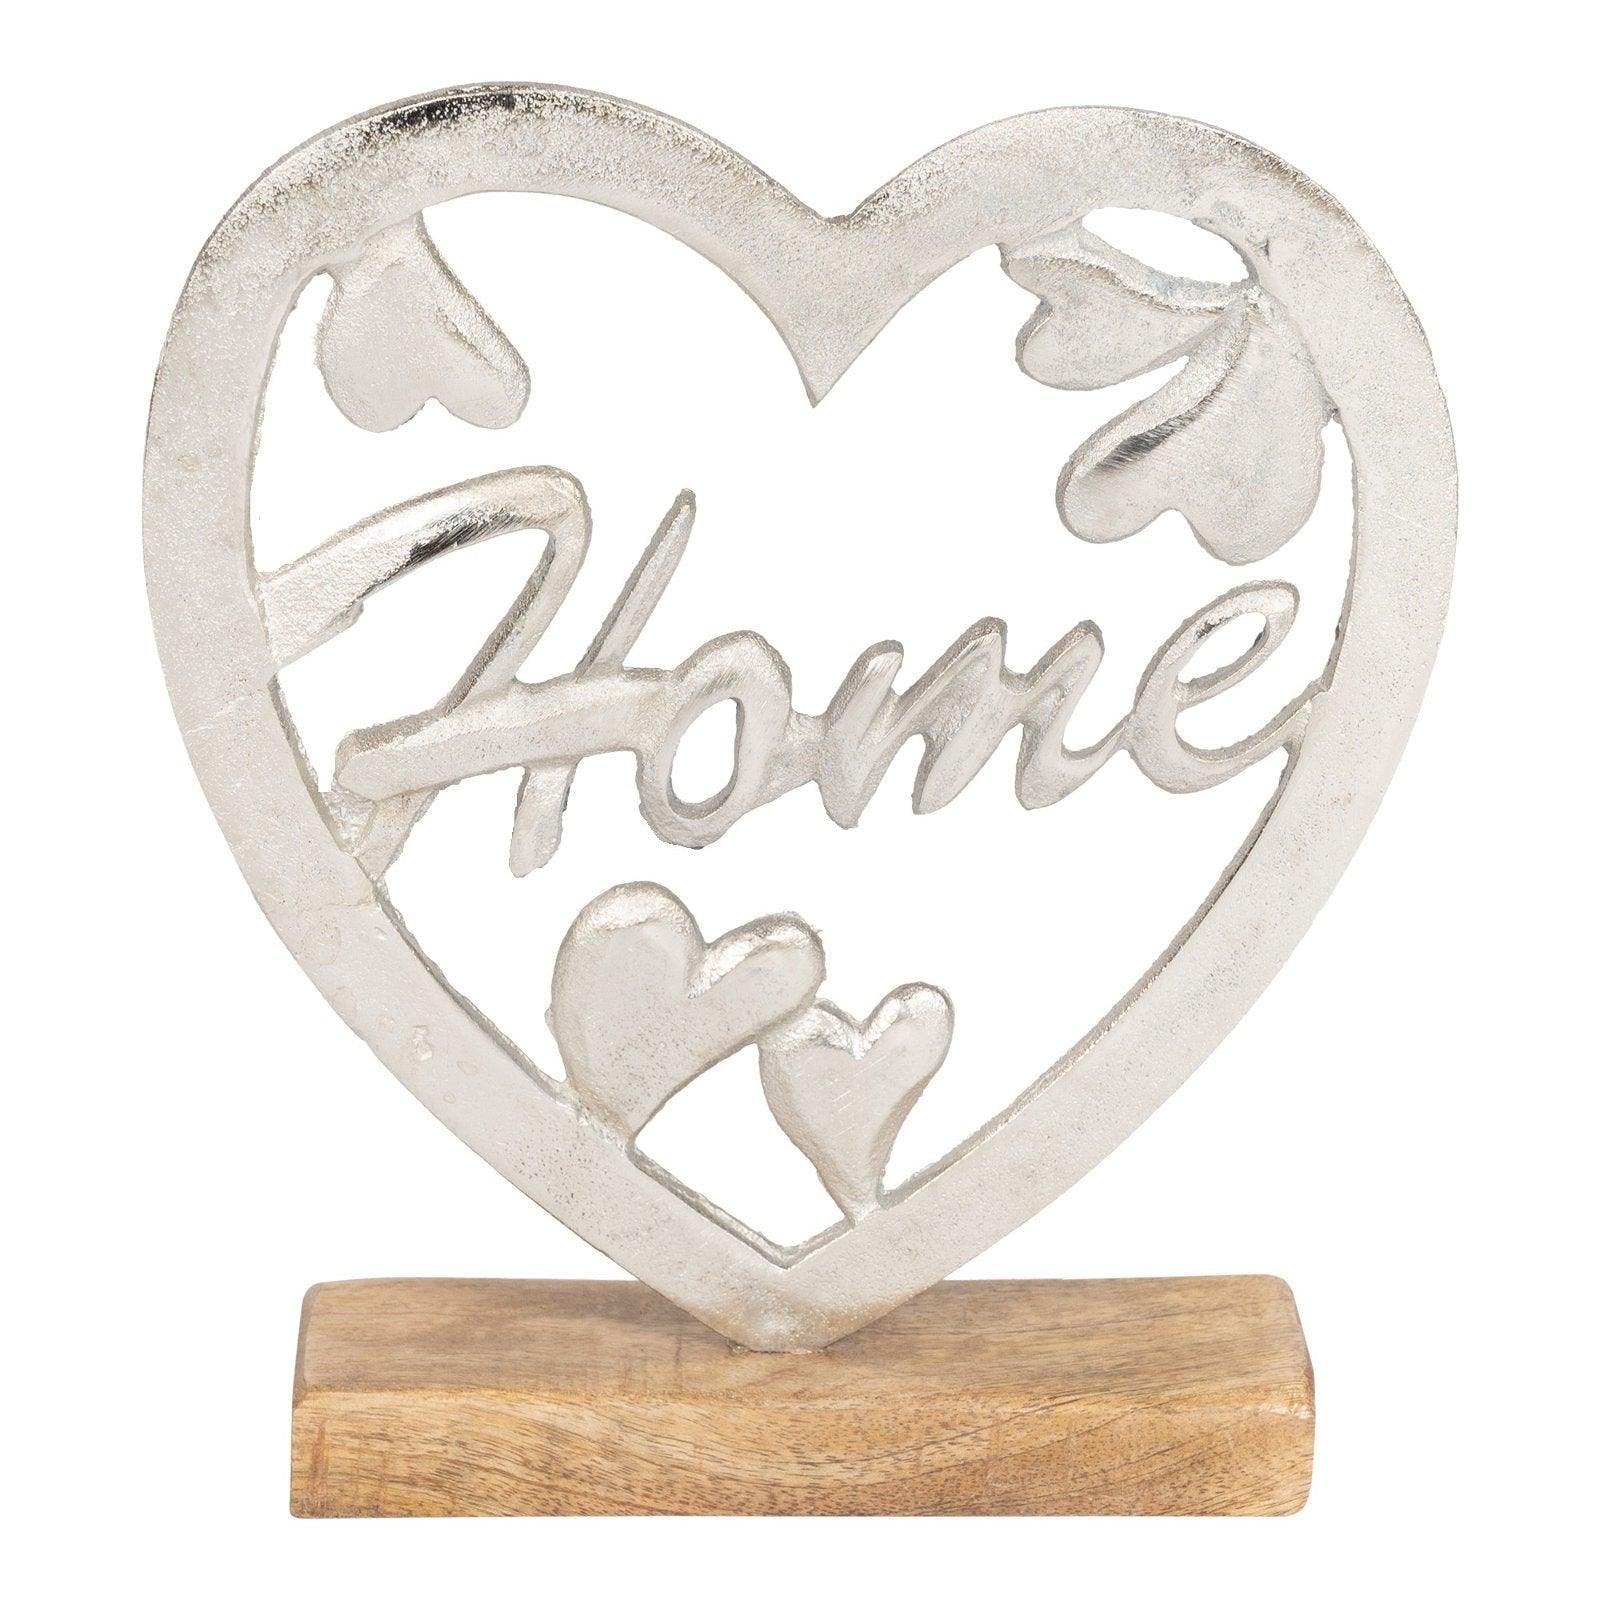 View Metal Silver Heart Home On A Wooden Base Large information